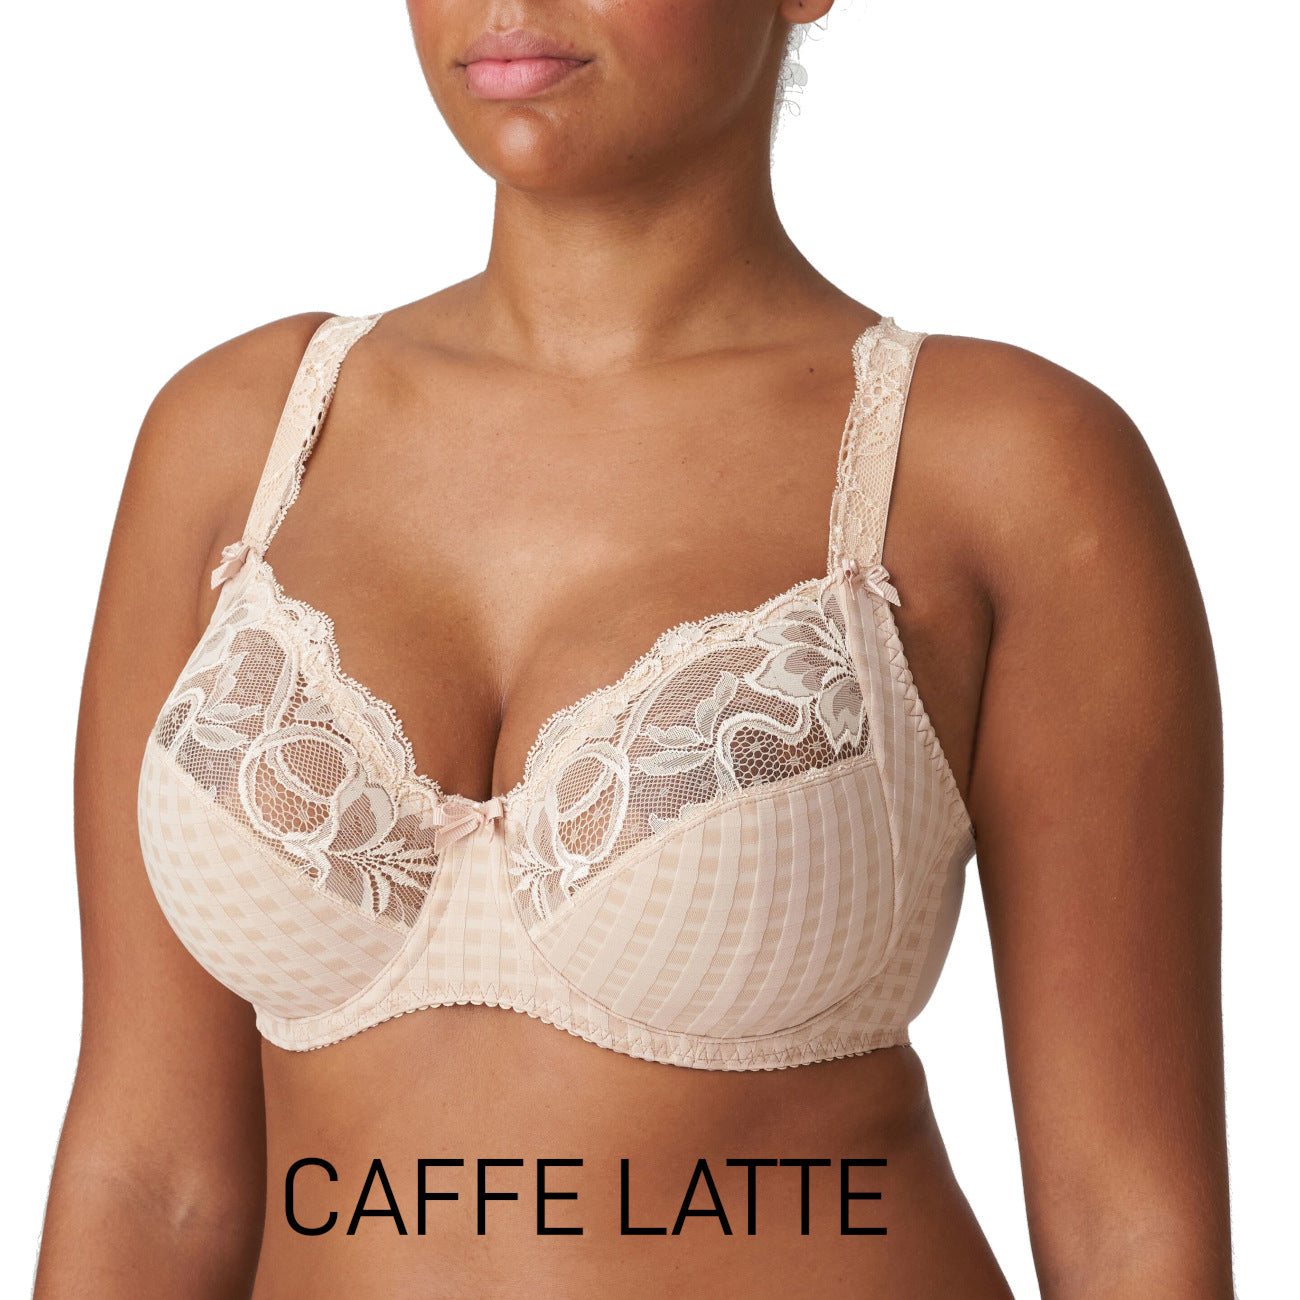 Forget Me Not Lace Molded Cups Wireless Nursing Maternity Bra